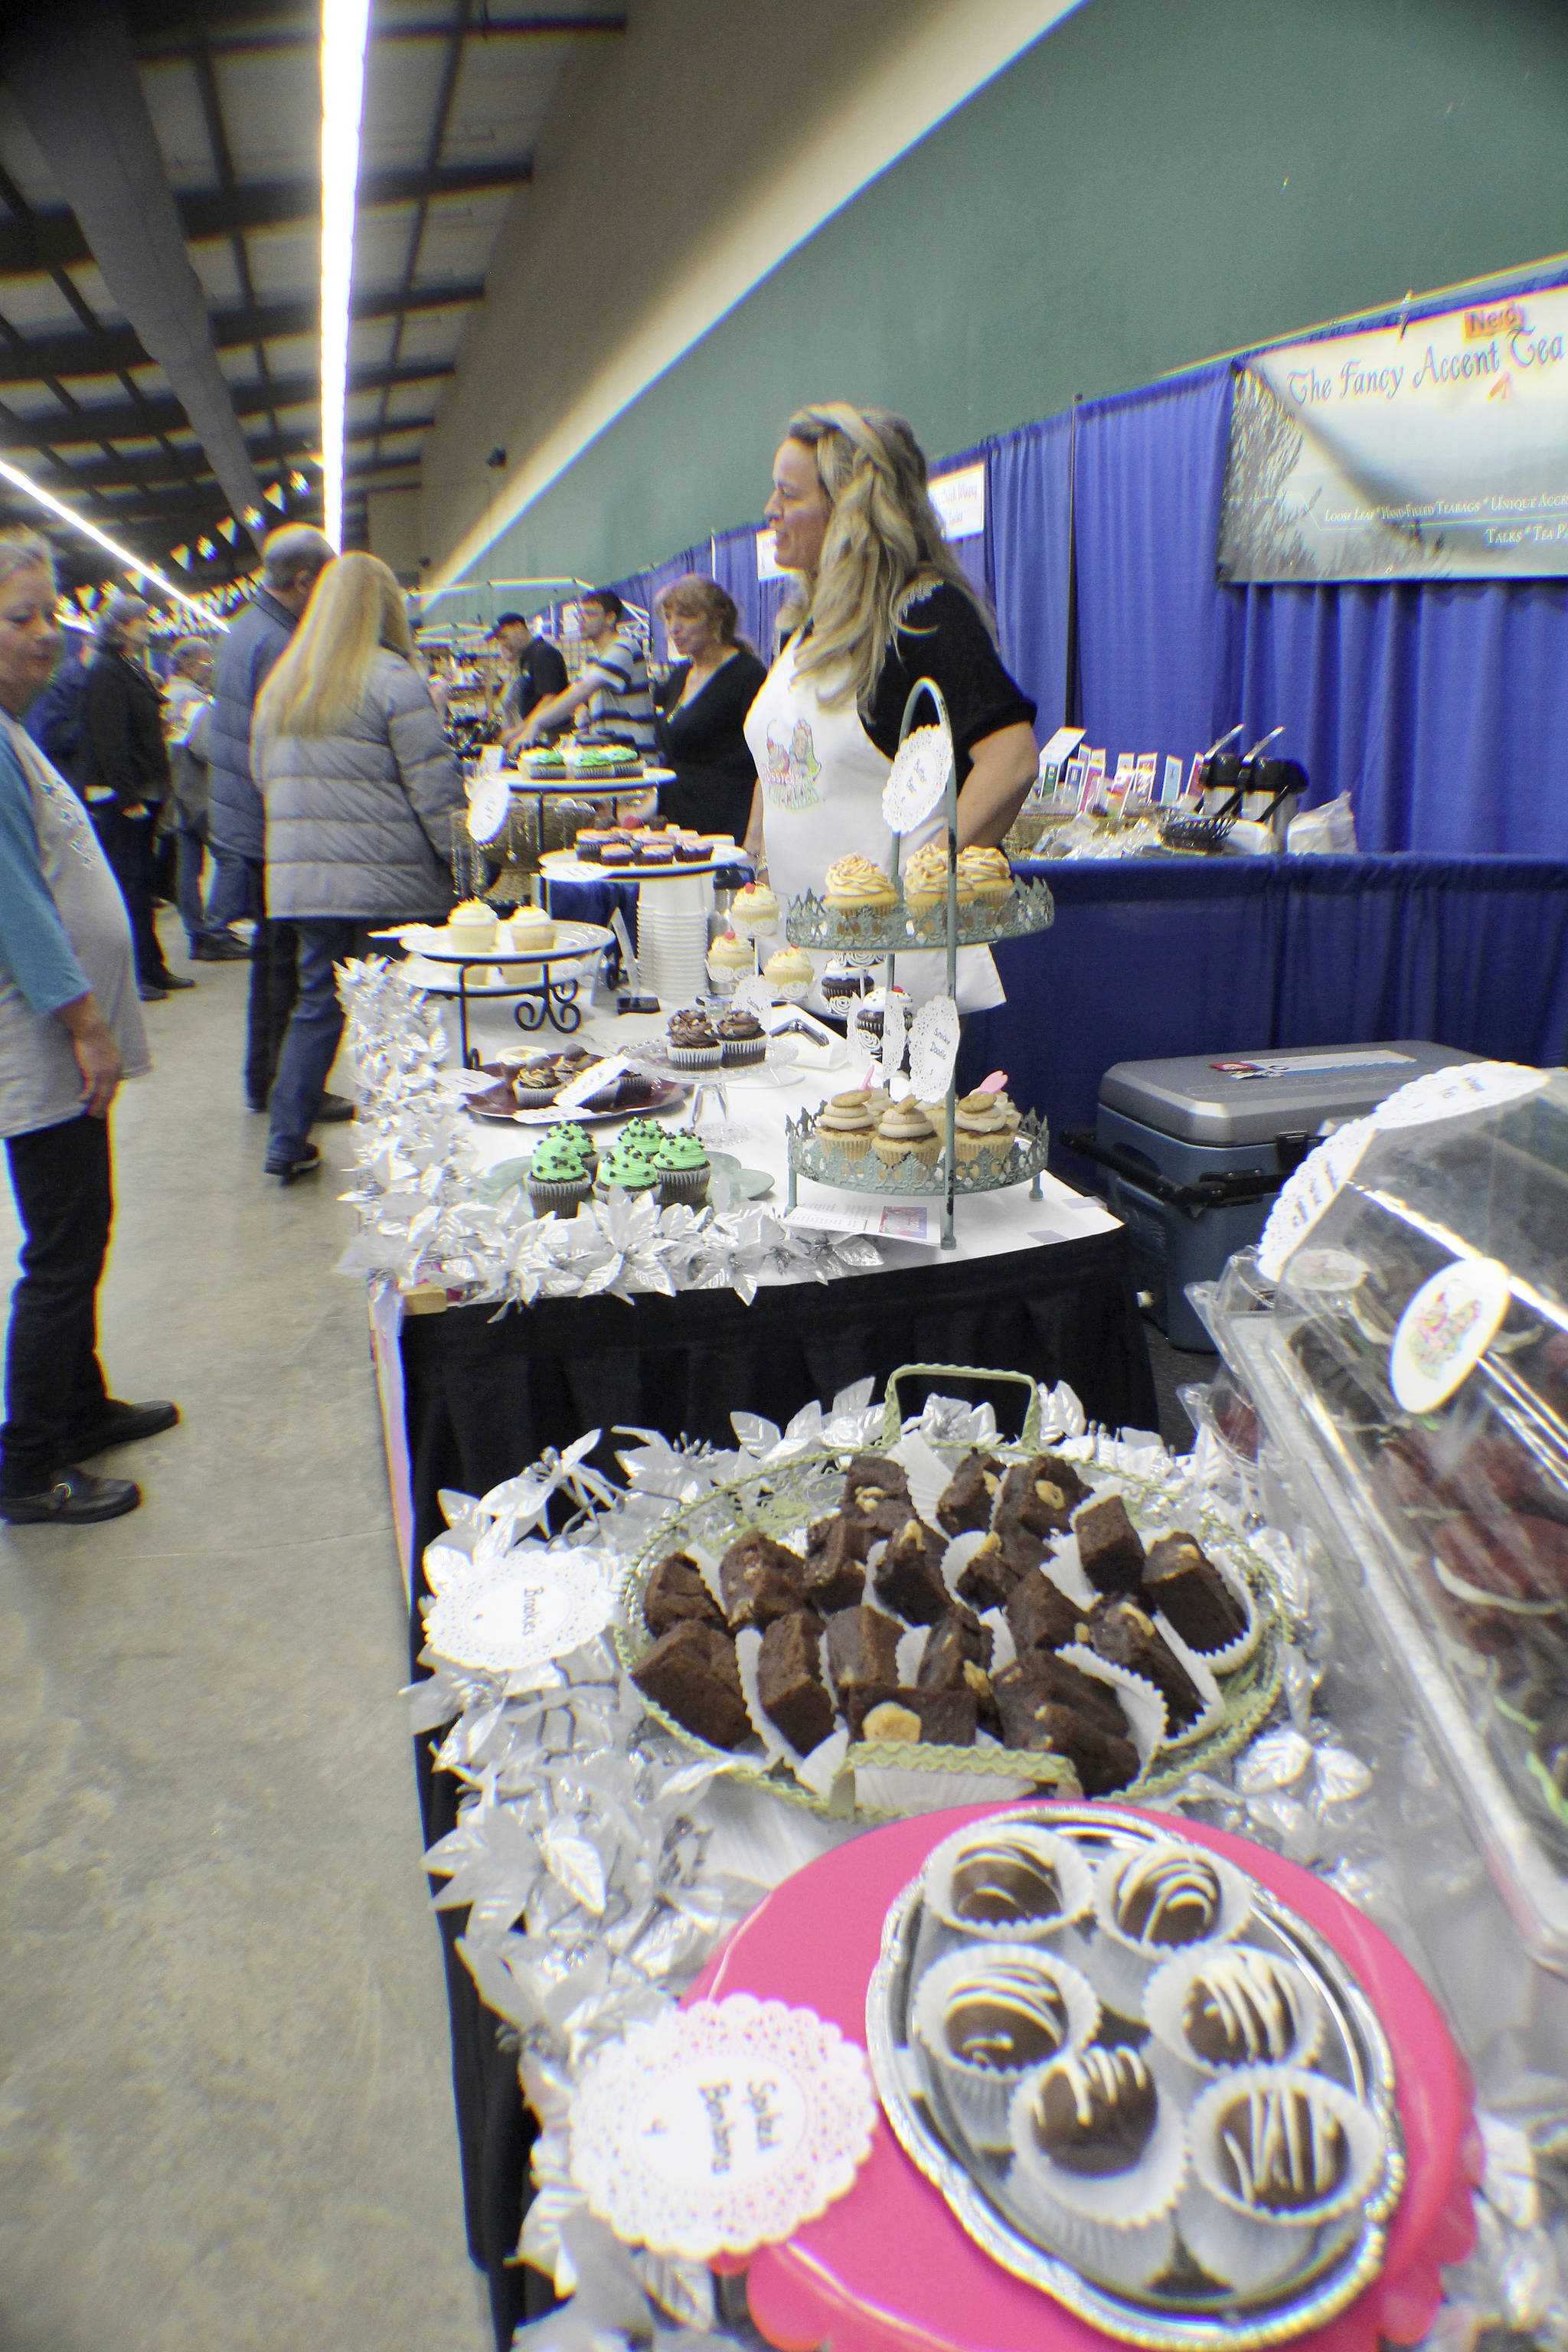 Winter Wine Festival in Elma draws about 1,700, Elma Chamber of Commerce says.